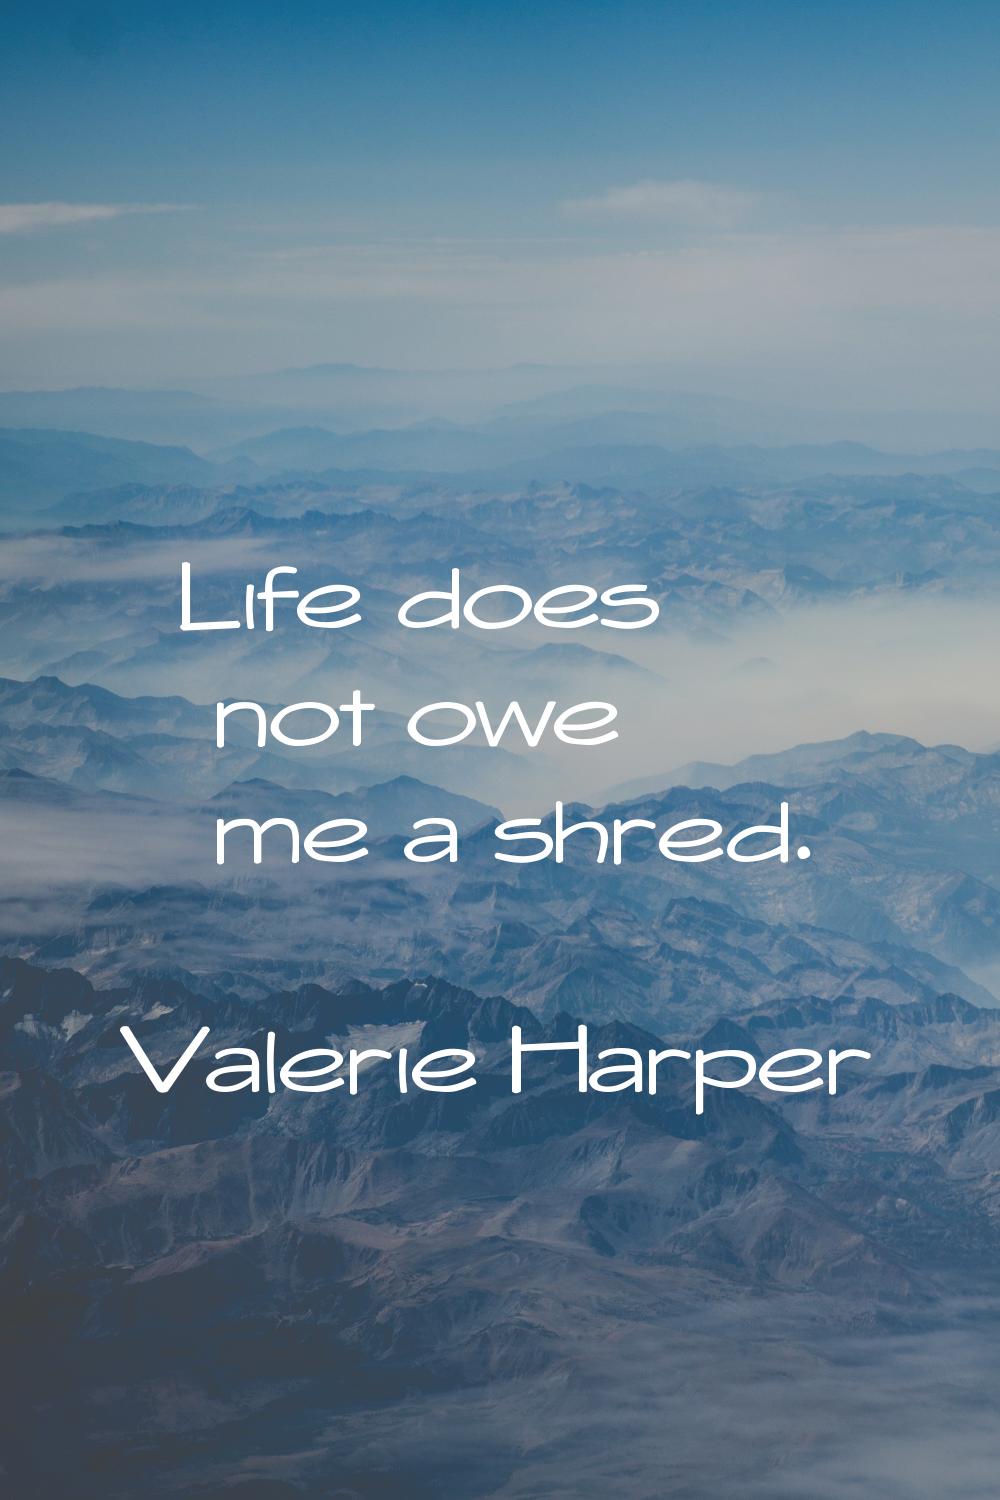 Life does not owe me a shred.